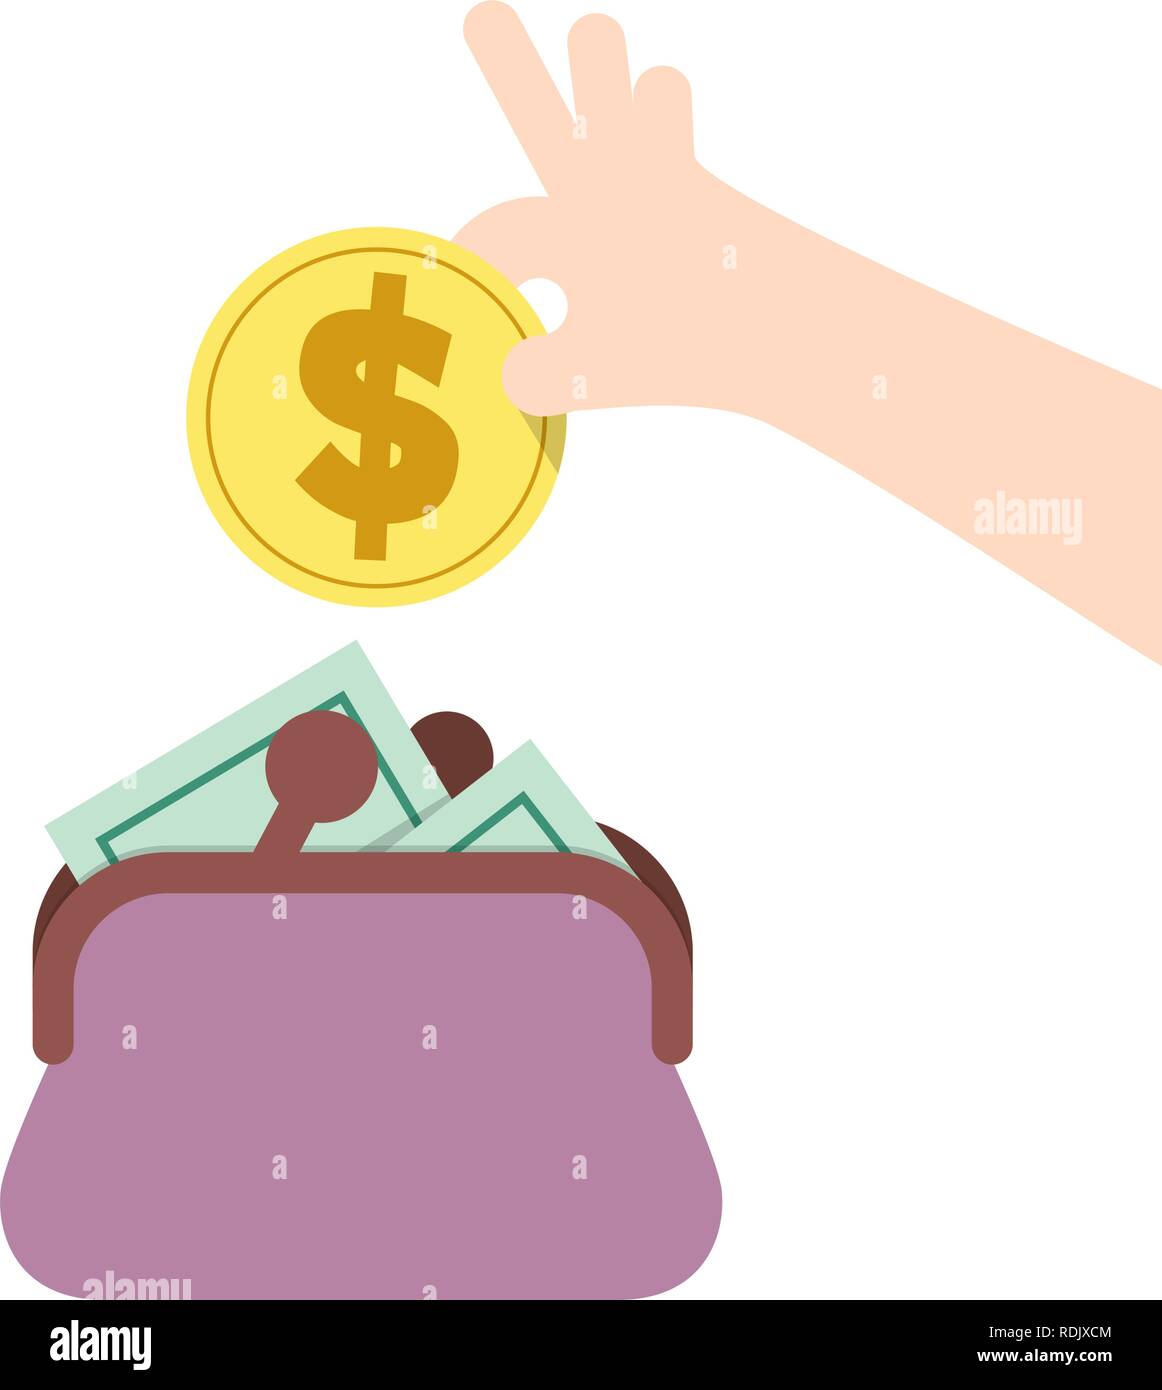 Illustration vector saving money and spending with purse. Finance Concept. Stock Vector